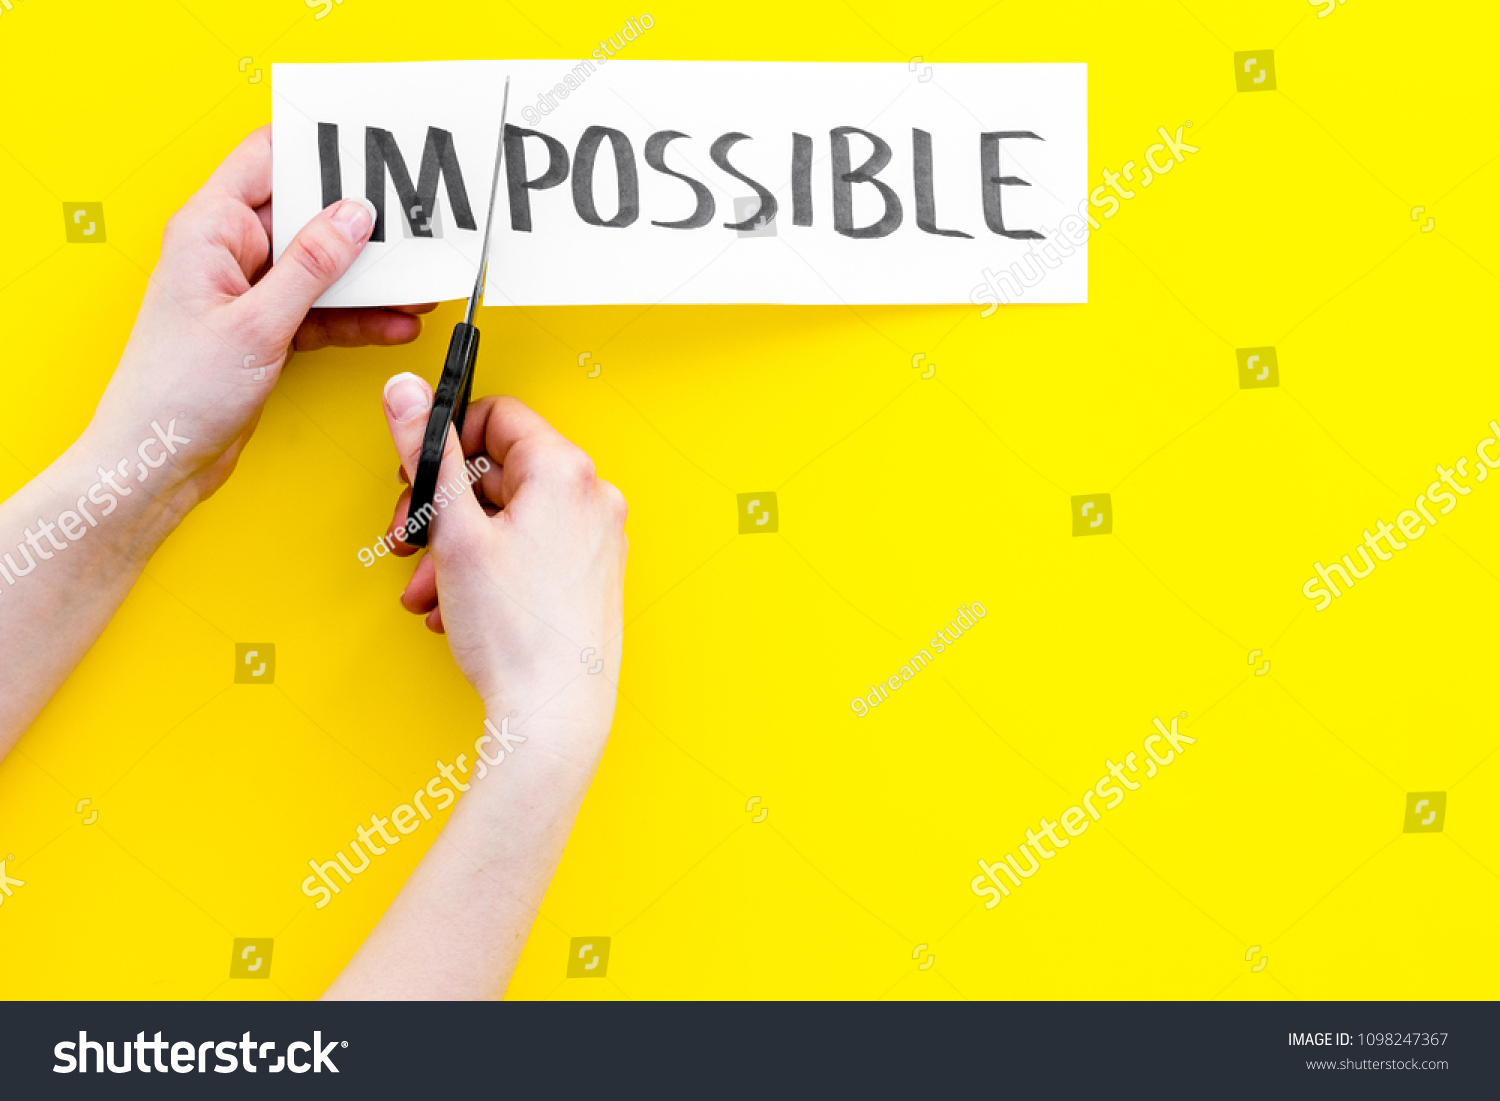 All is possible concept. Hands cutting the part im of written word impossible by sciccors. Yellow background top view copy space #1098247367